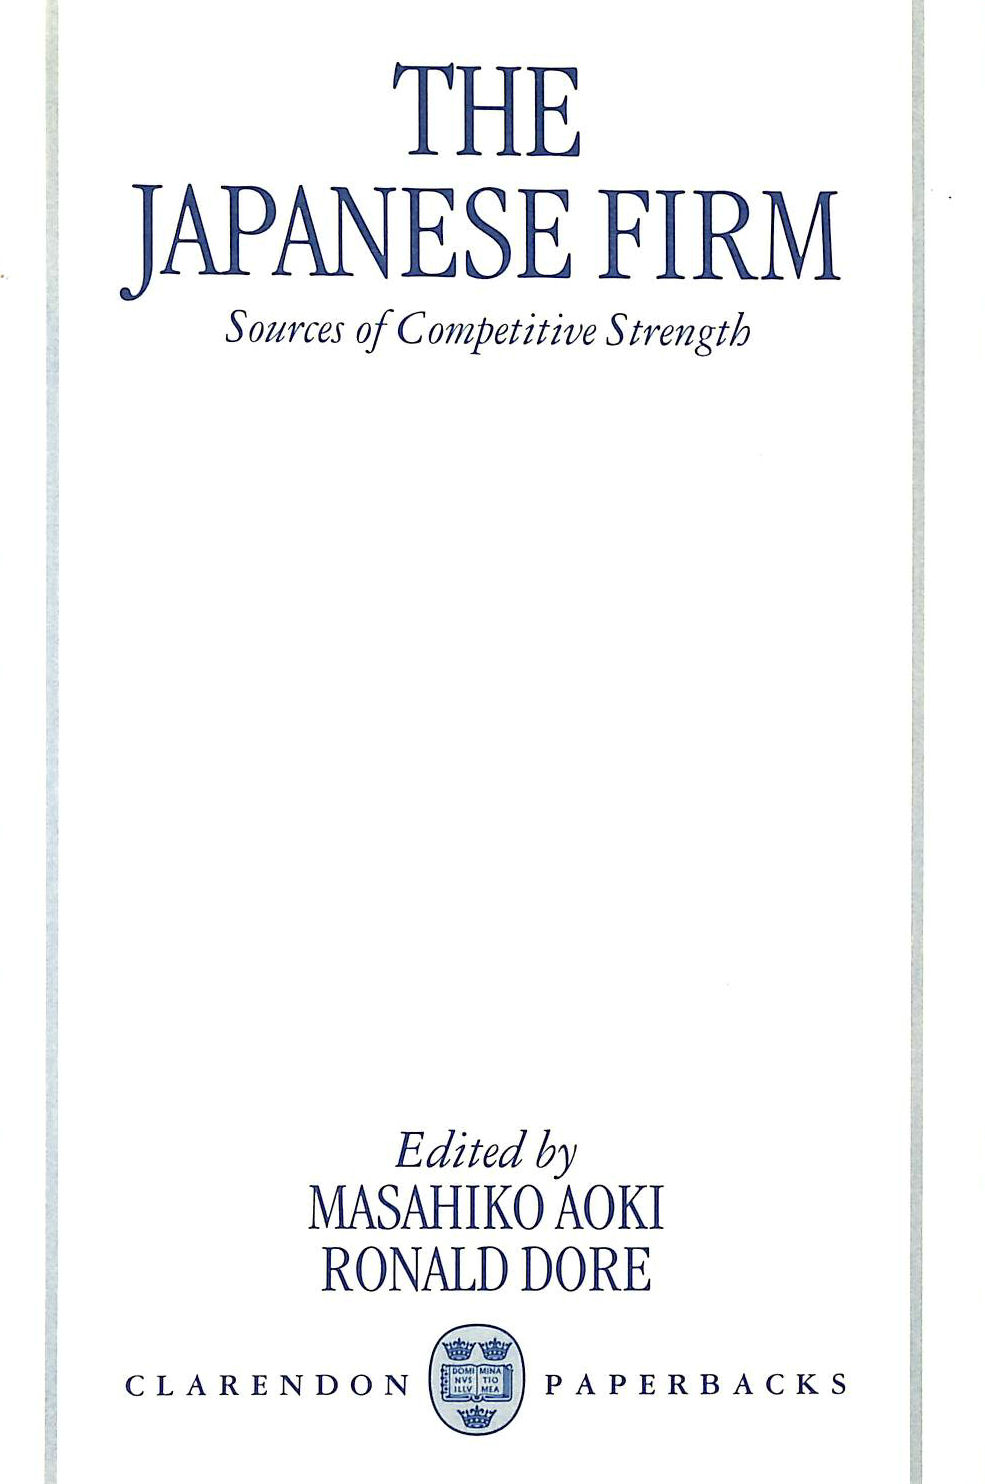 MASAHIKO AOKI - The Japanese Firm: Sources of Competitive Strength (Clarendon Paperbacks)